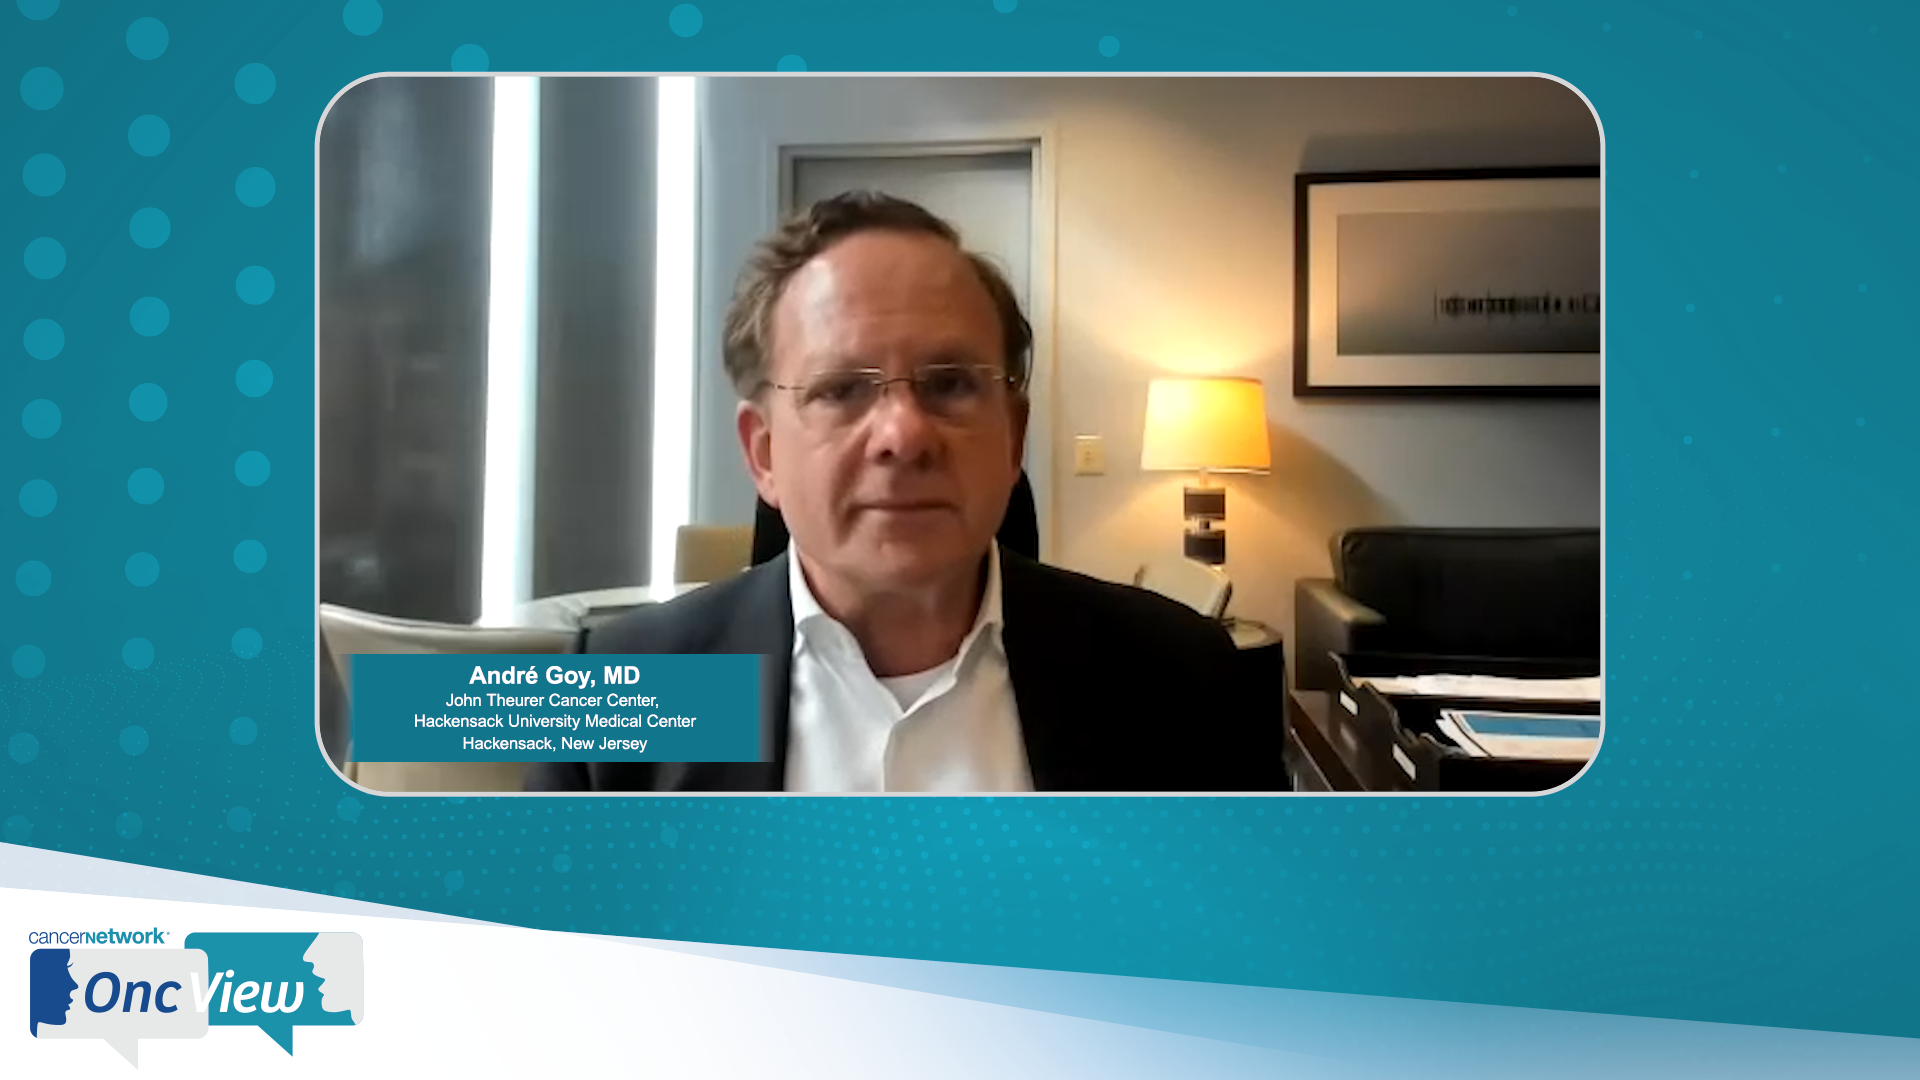 André Goy, MD, an expert on B-cell malignancies